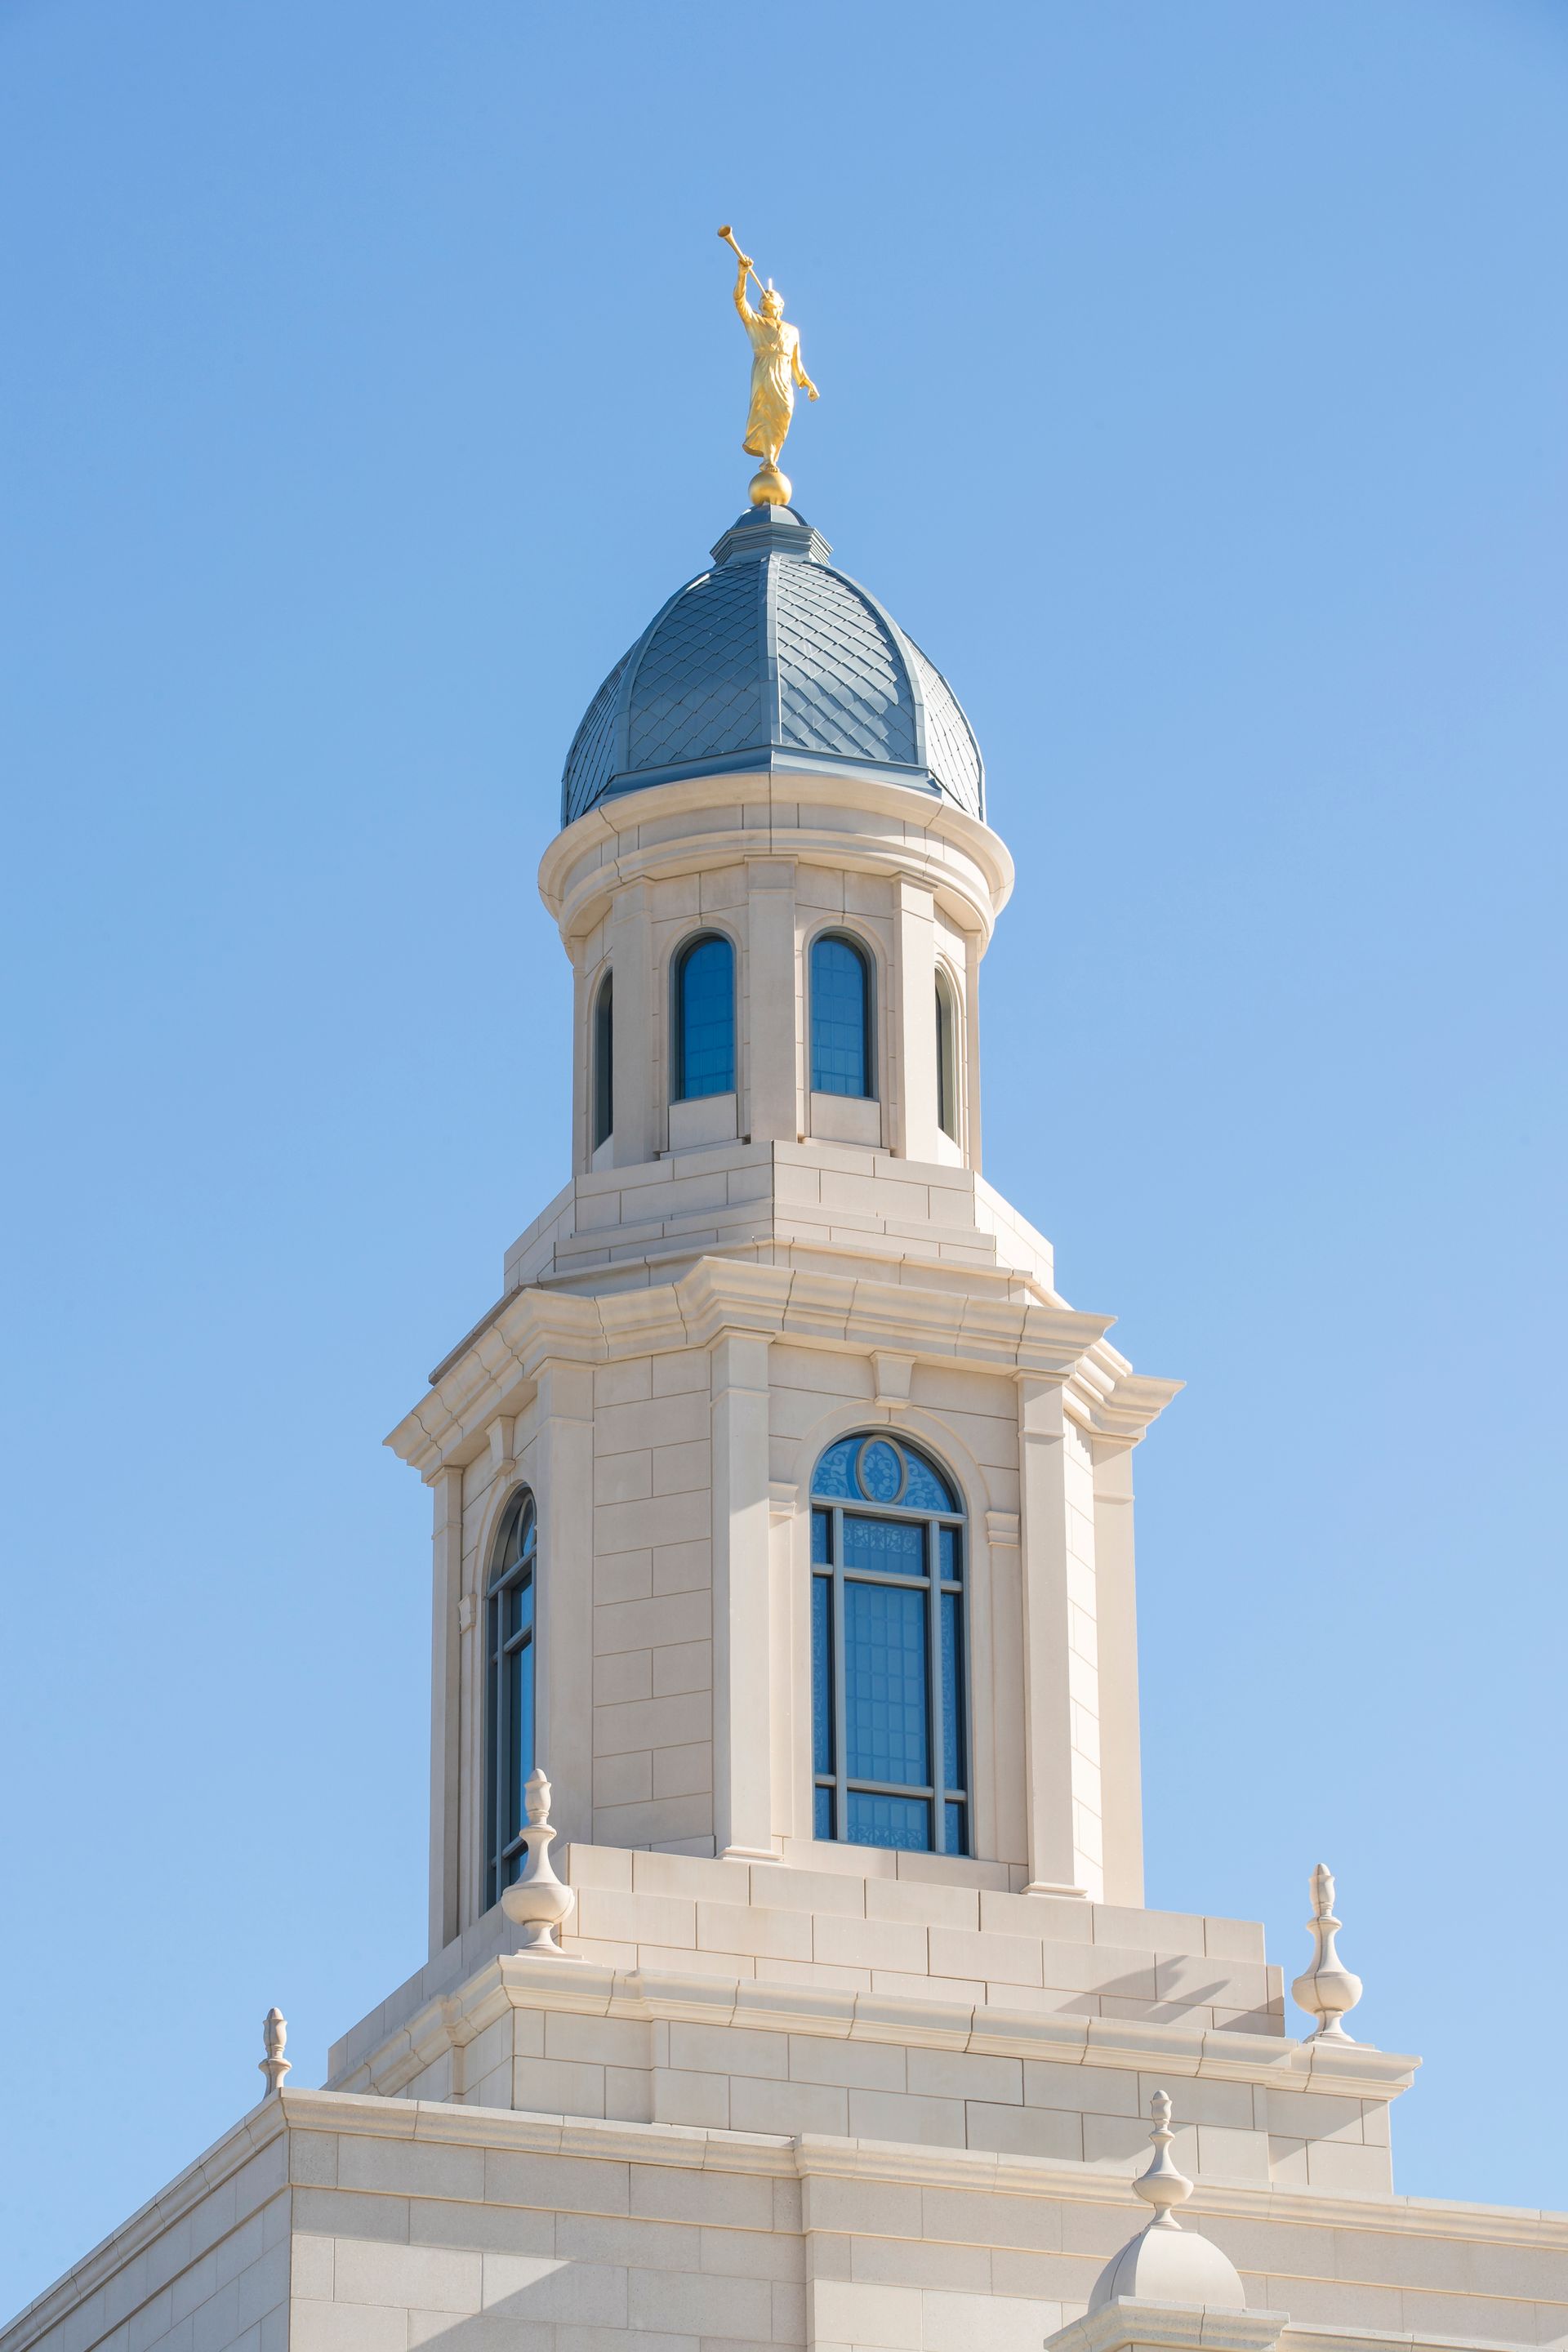 A view of the spire and angel Moroni statue on the Concepción Chile Temple.